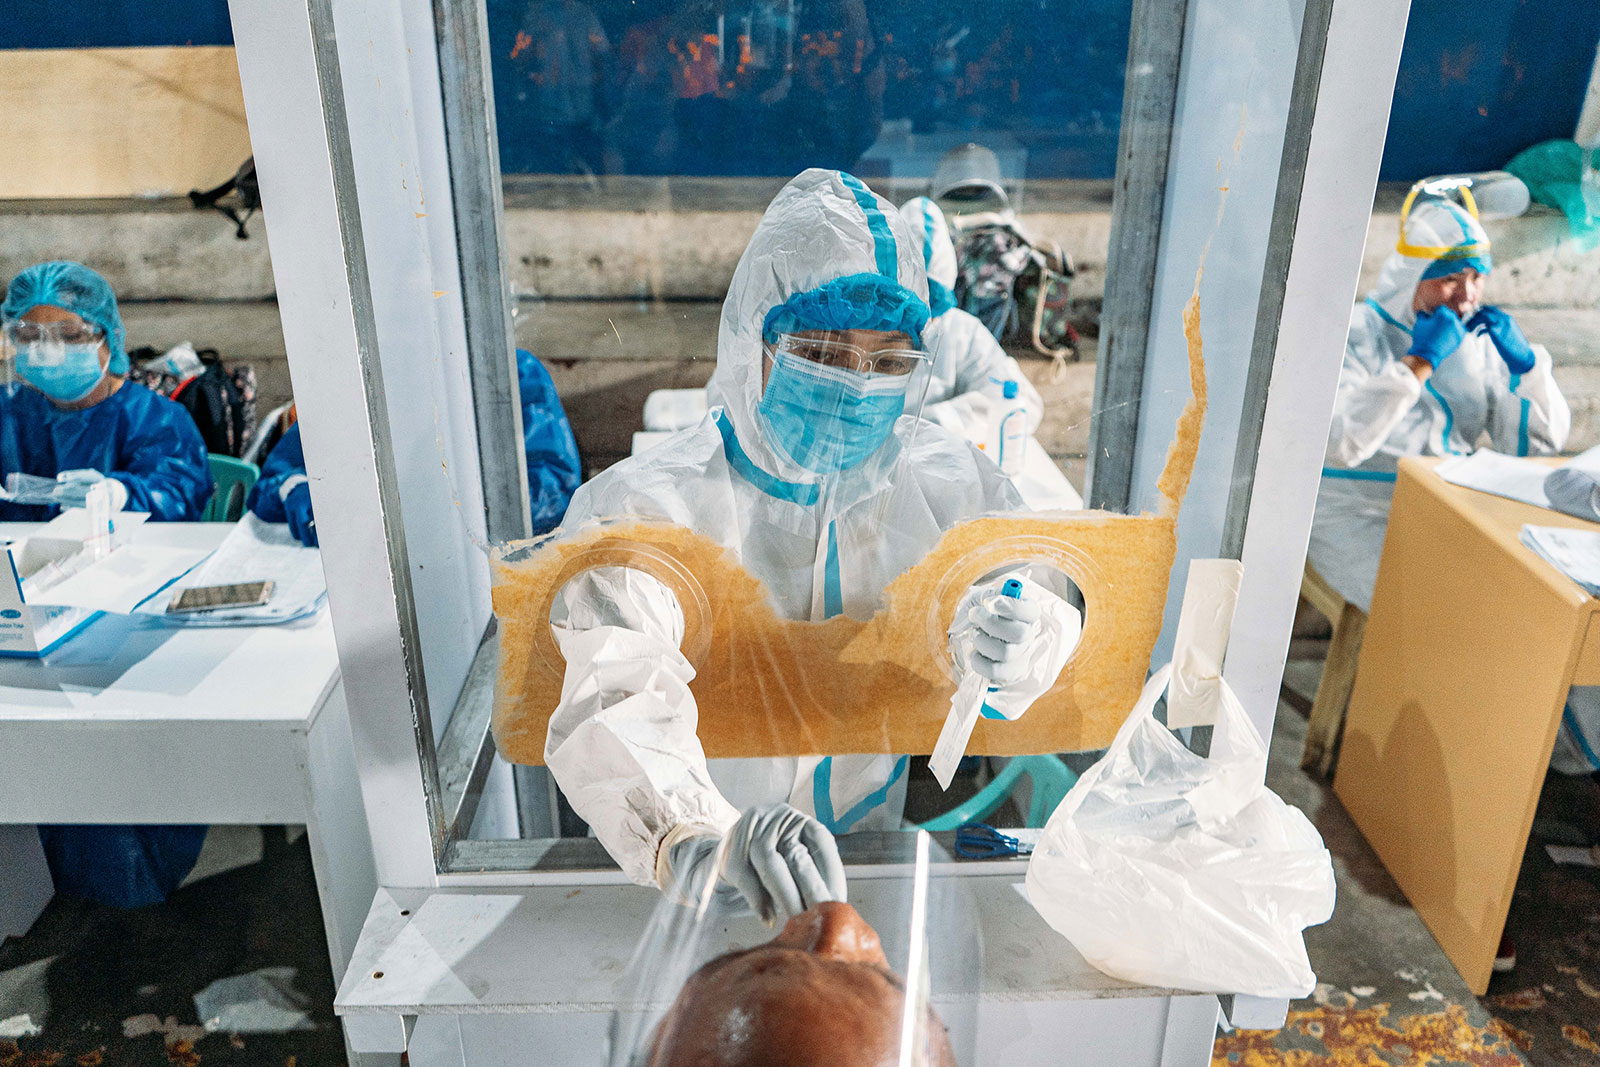 A health worker conducts a coronavirus test at a covered court in Metro Manila, Philippines, on October 6.